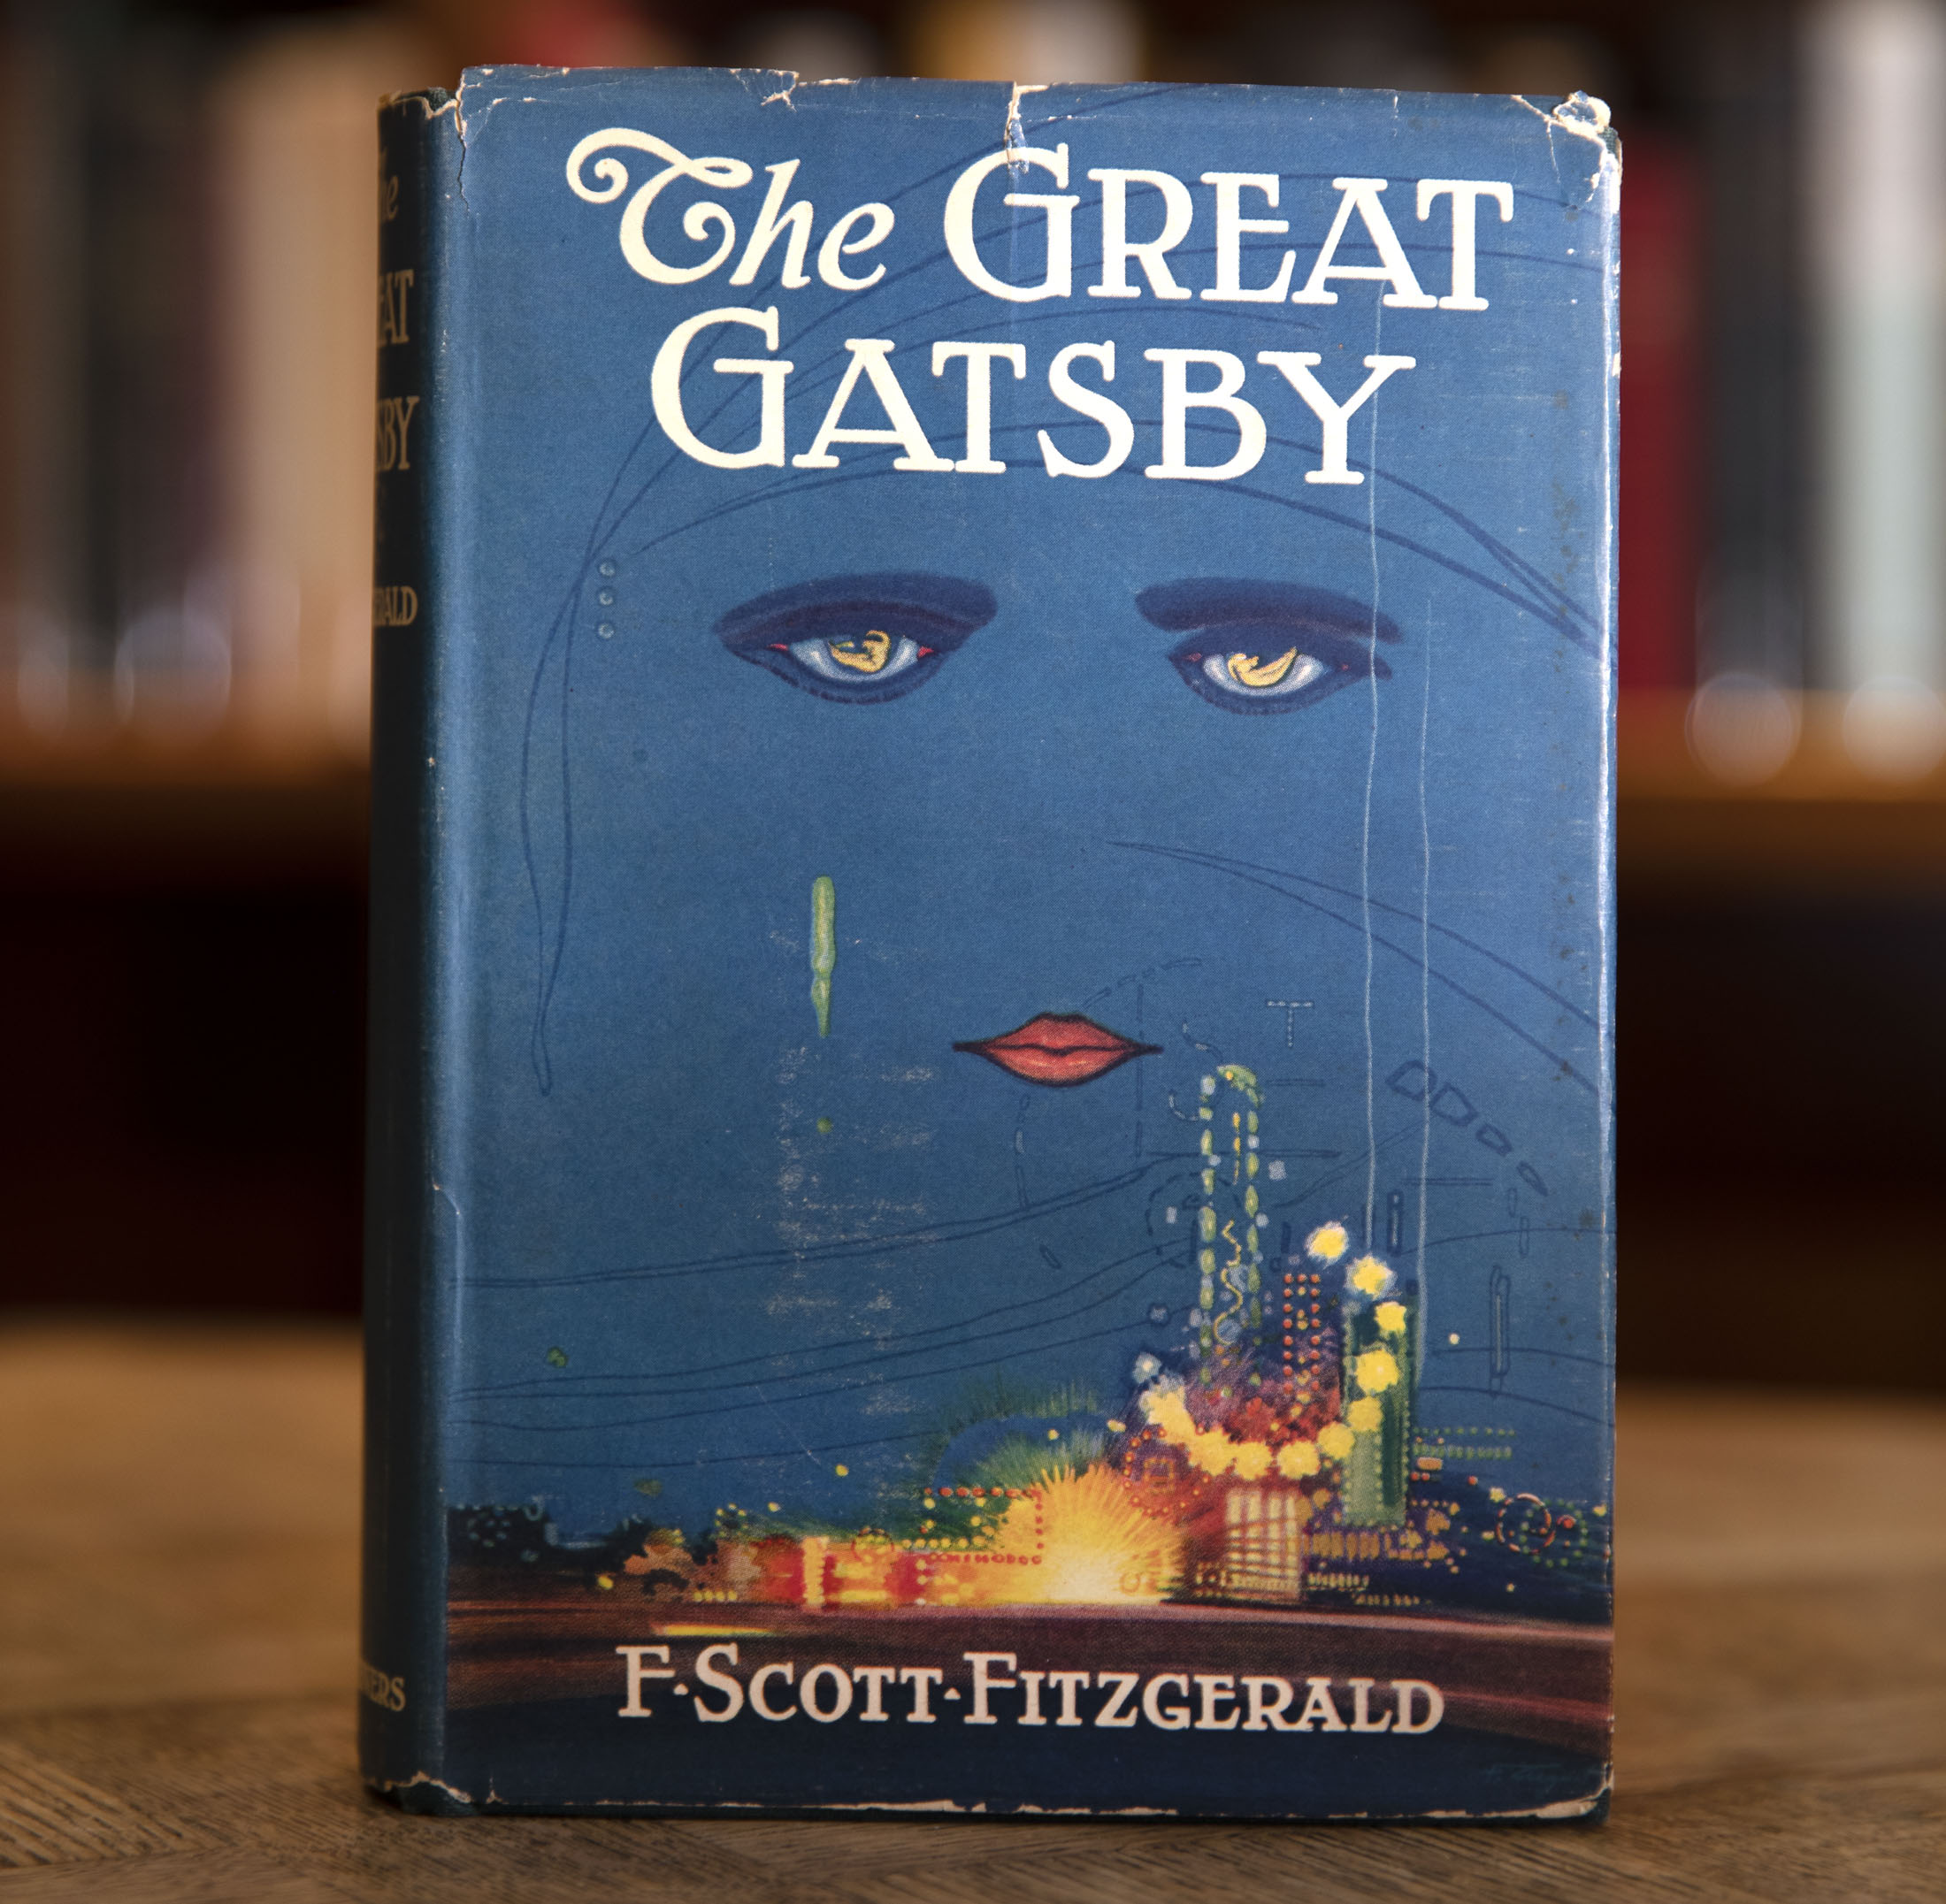 write a book review of the great gatsby